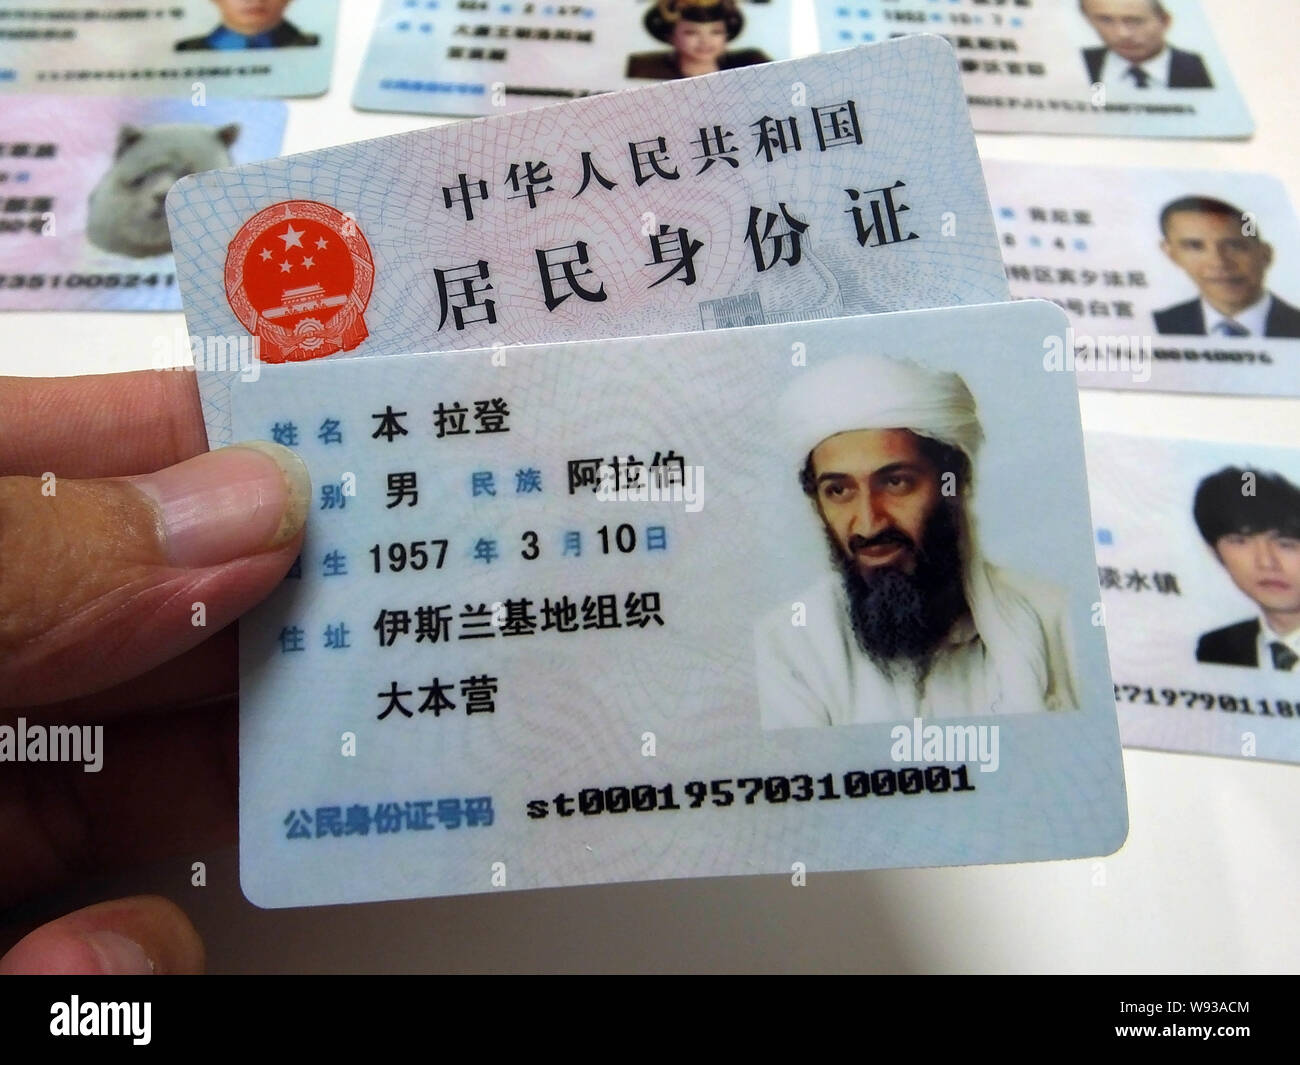 A man shows a fake Chinese ID card of former Al-Qaeda leader Osama bin  Laden for sale at a stall on a street in Guangzhou city, south Chinas  Guangdong Stock Photo -